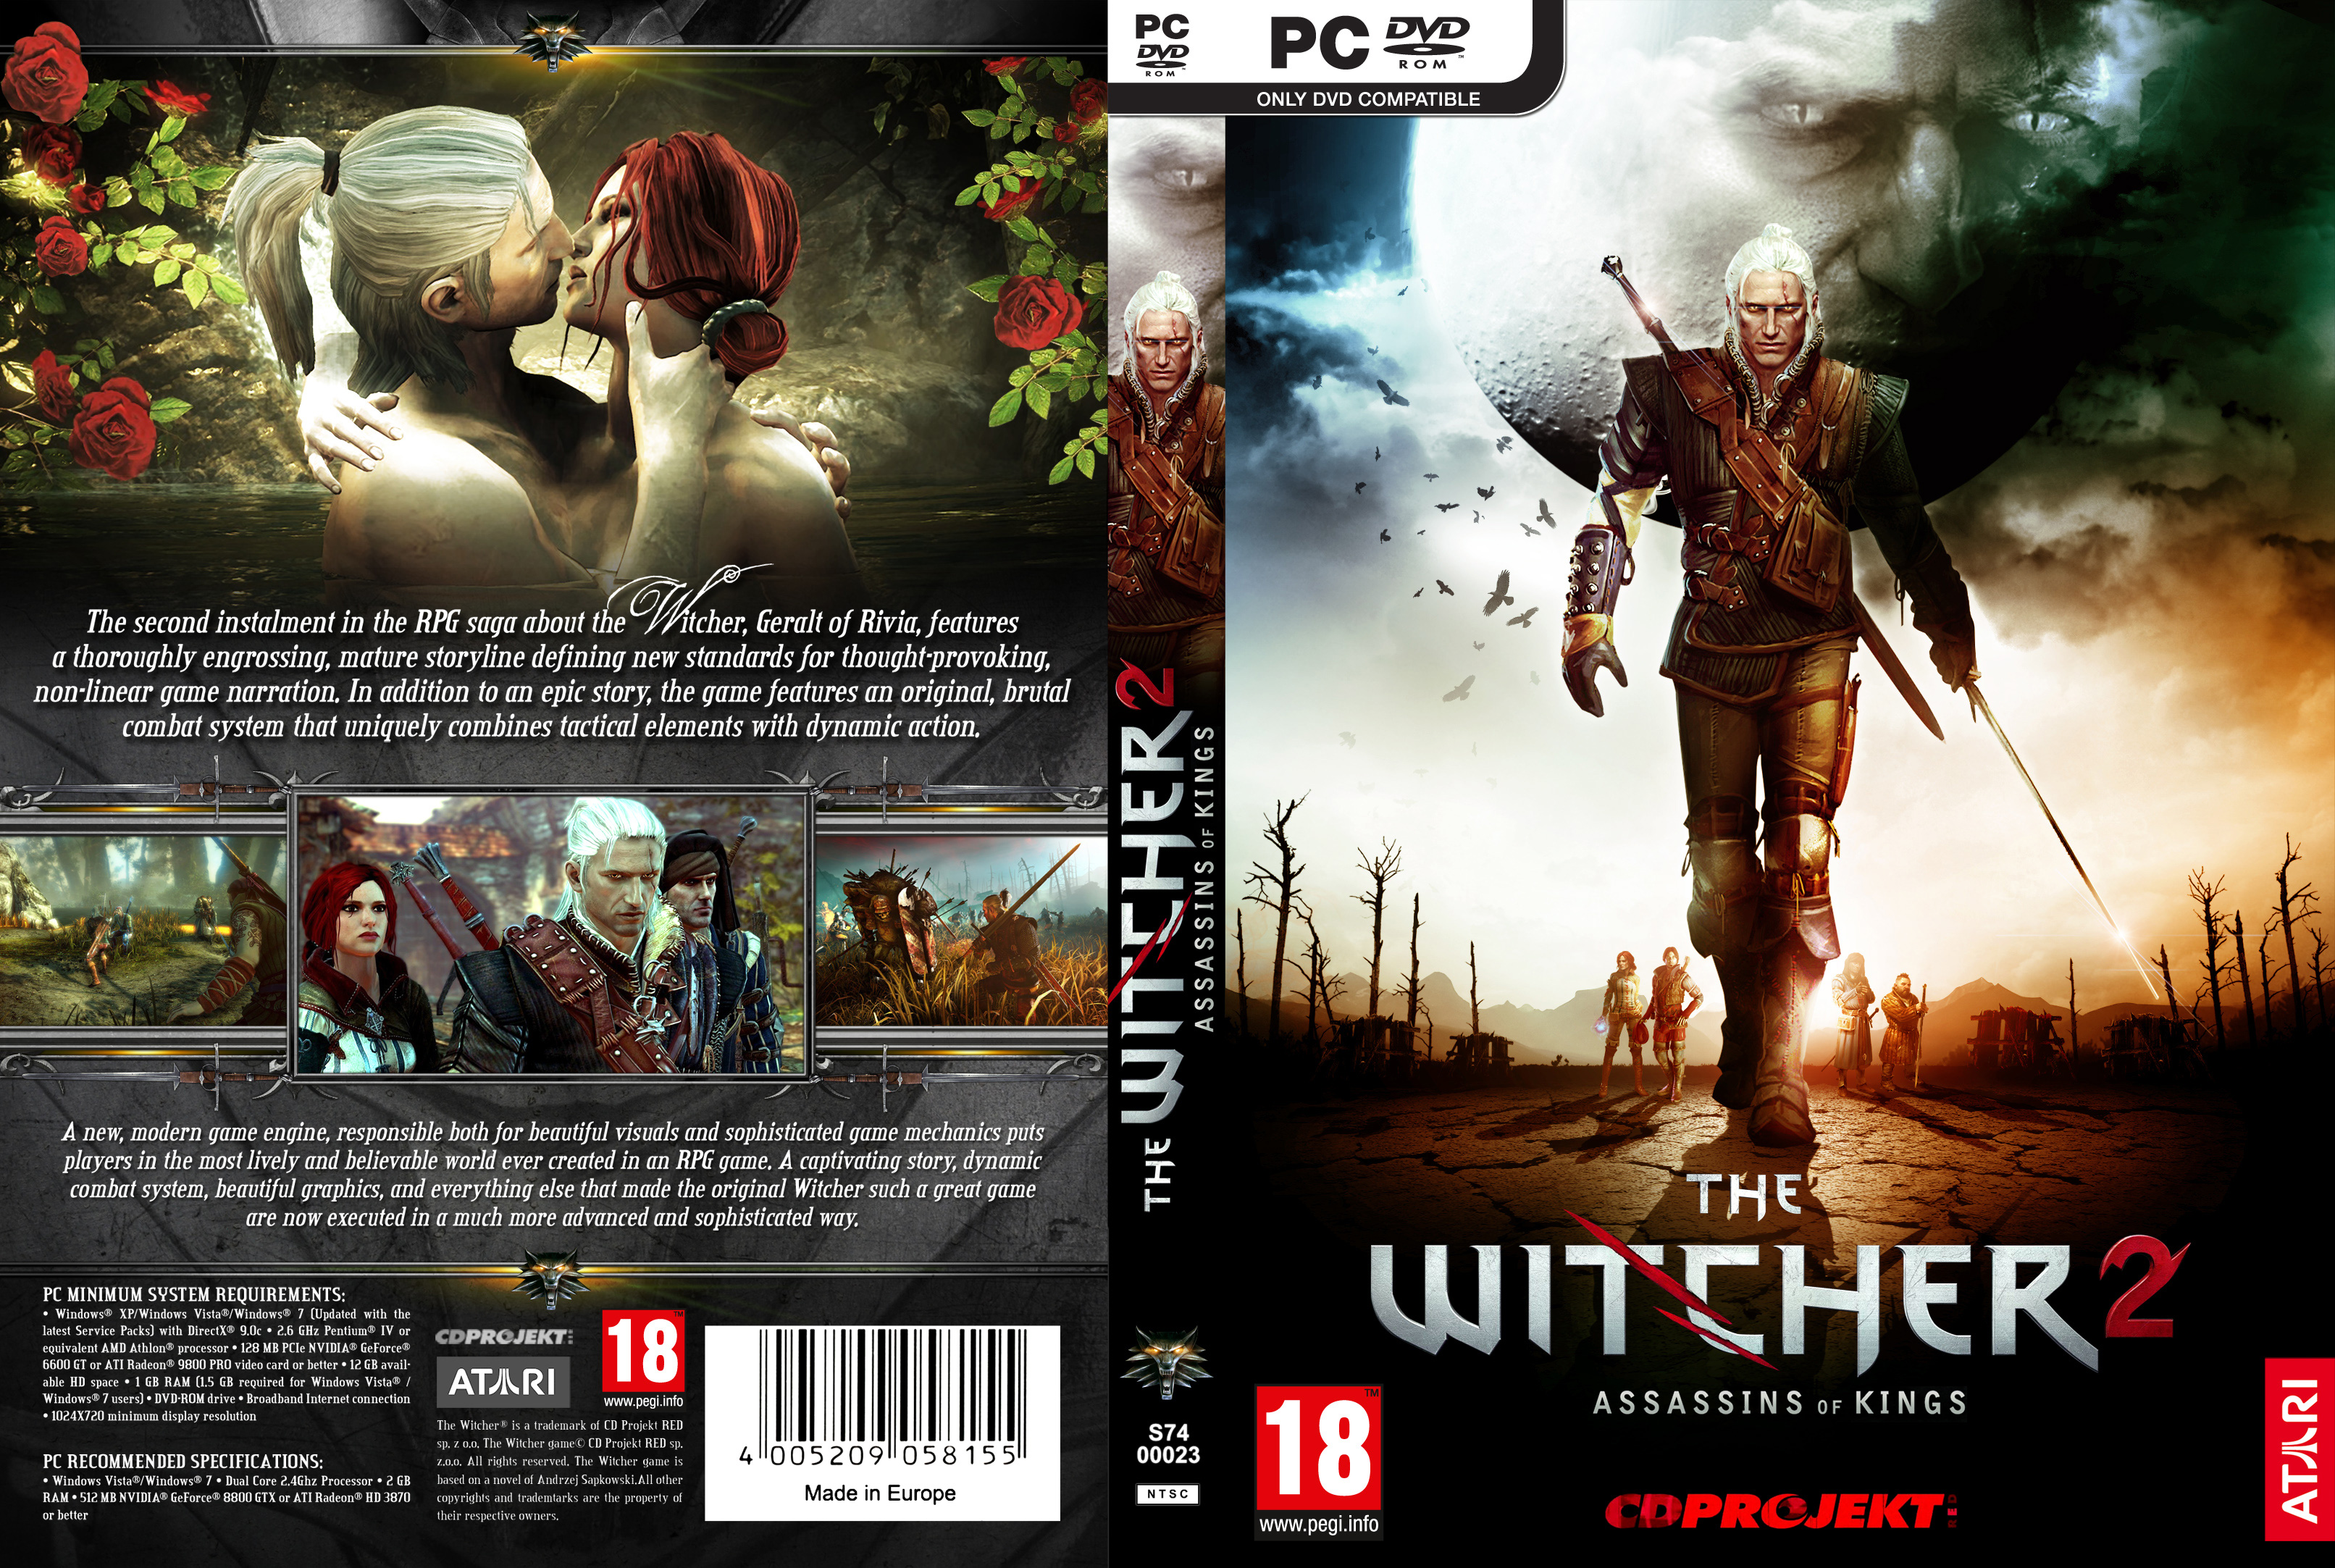 The Witcher 2: Assassins of Kings - DVD obal 2